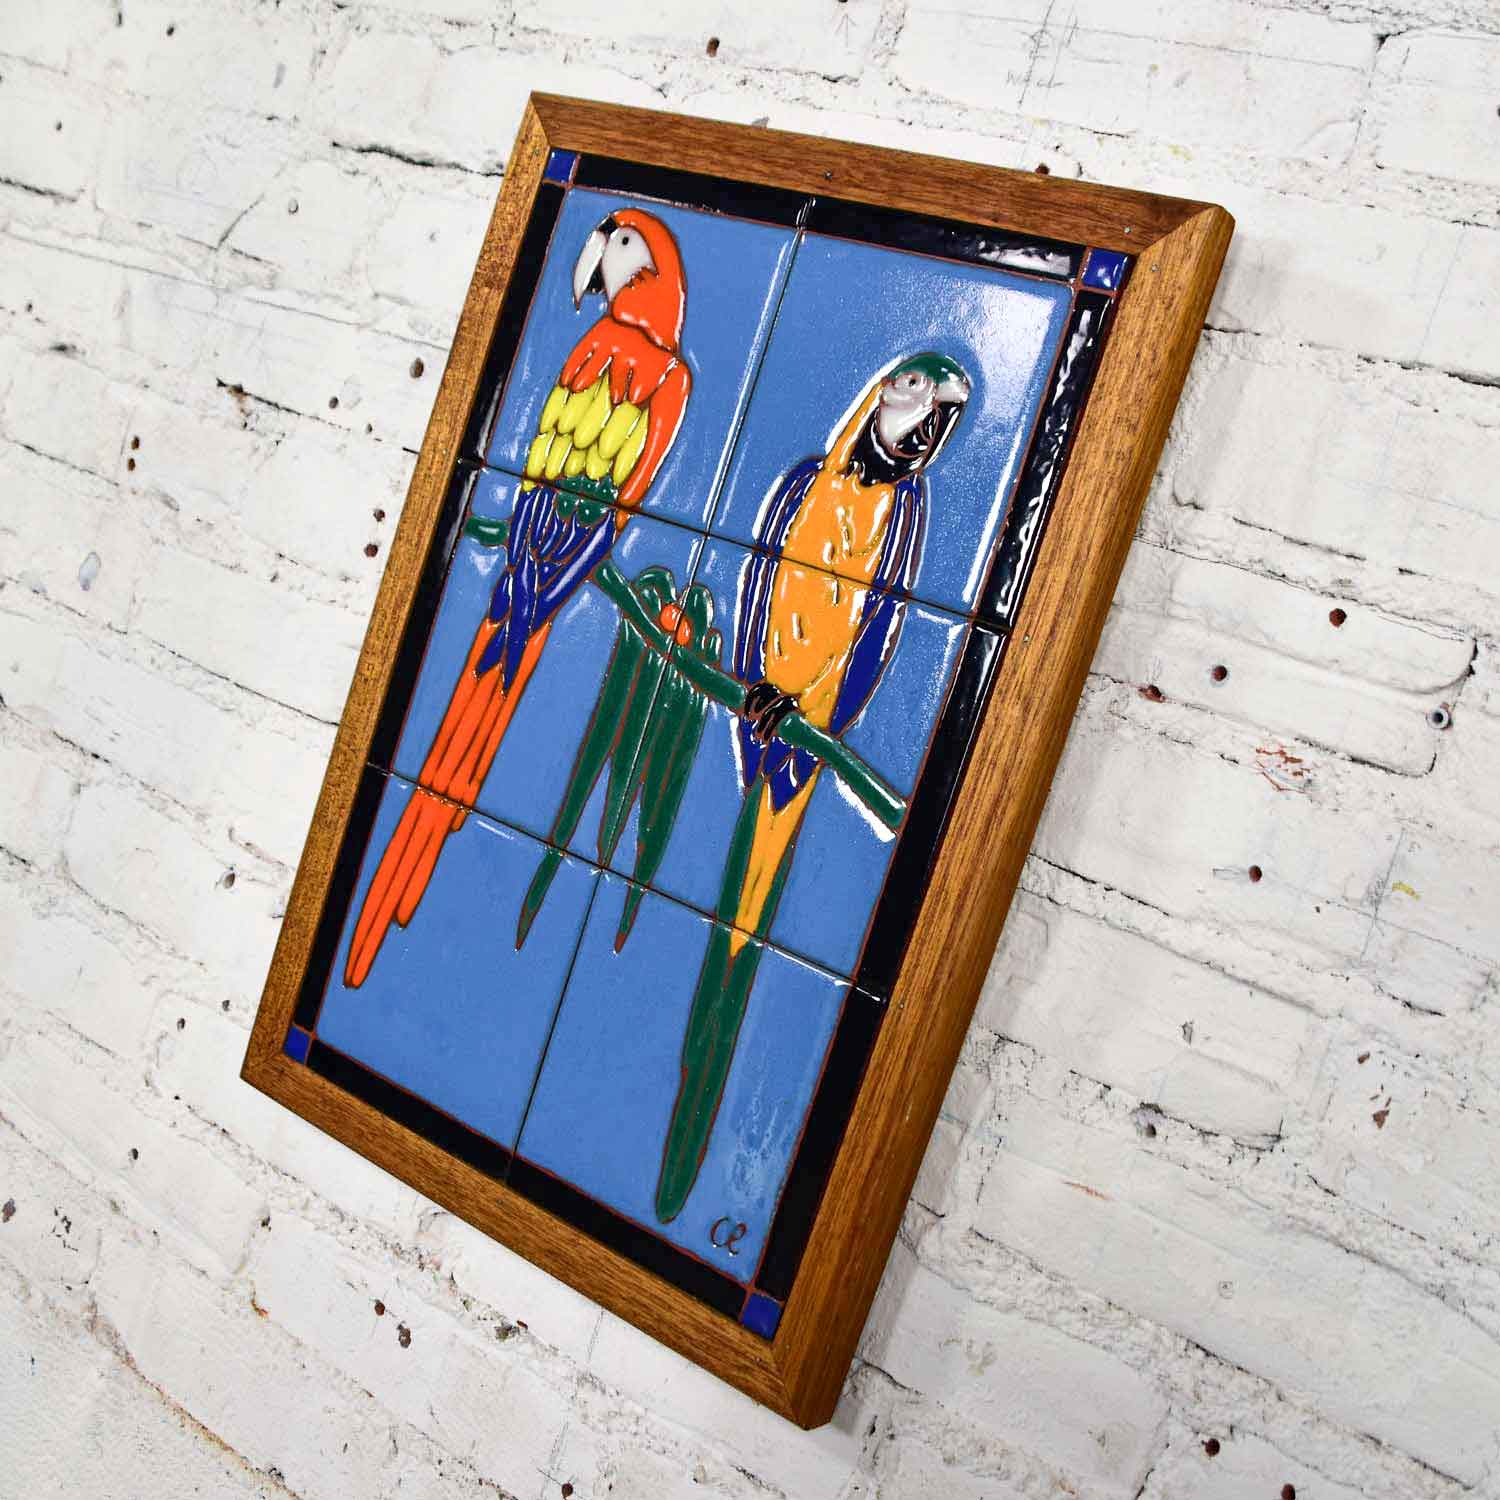 Catalina California Taylor or Mission Arts & Crafts Style Majolica Parrot Ceramic Tile Plaque by Palisades Picture Tile